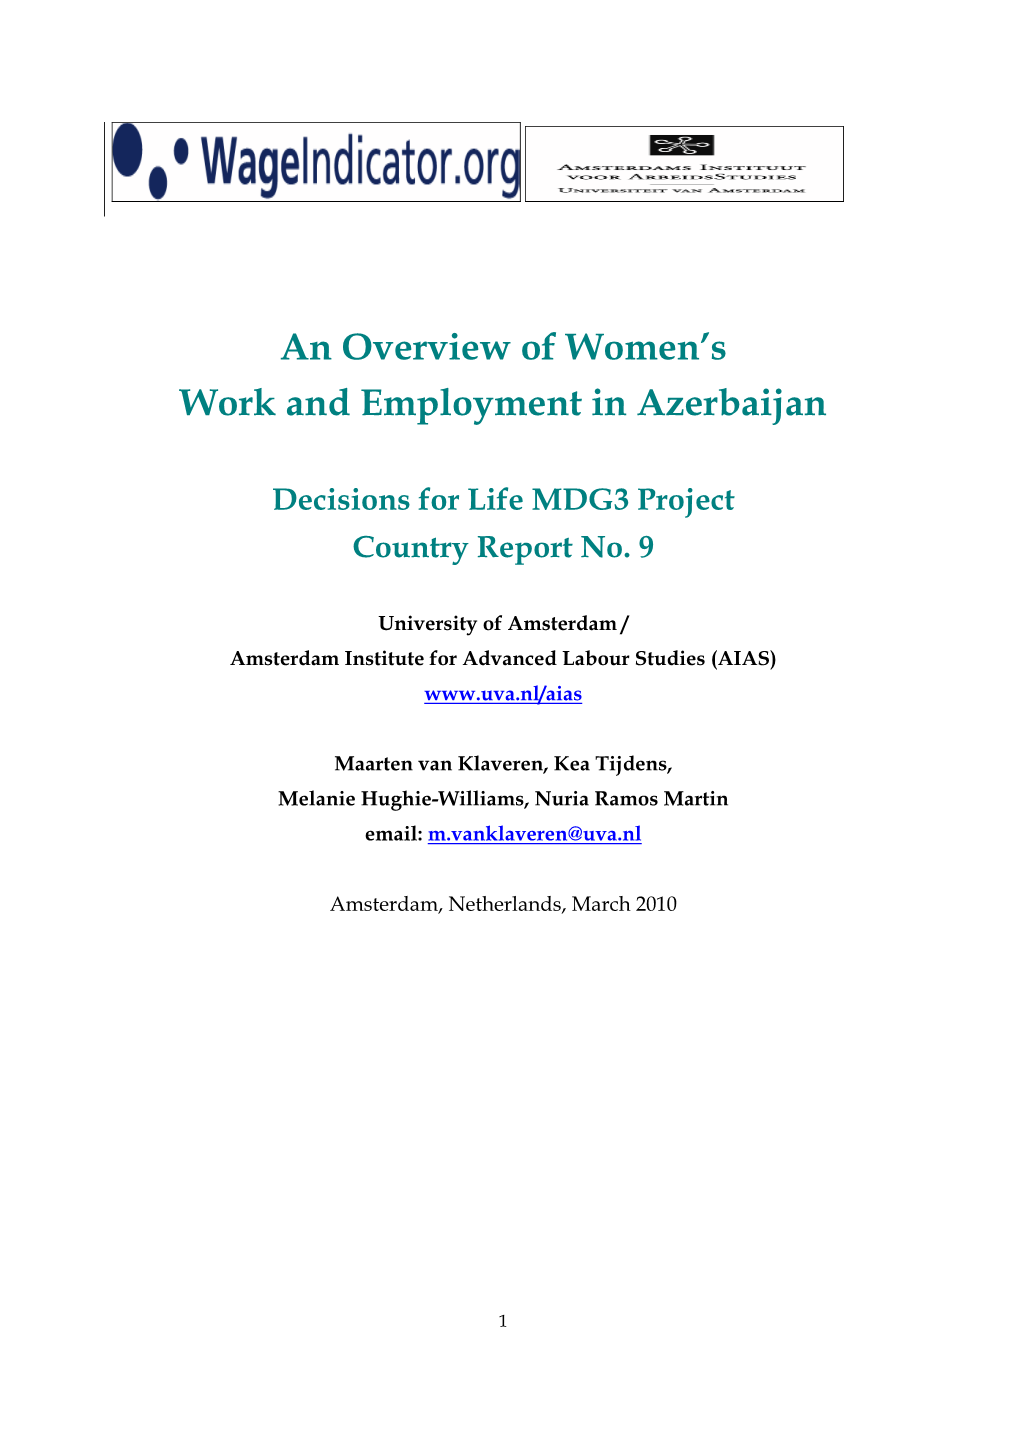 An Overview of Women's Work and Employment in Azerbaijan